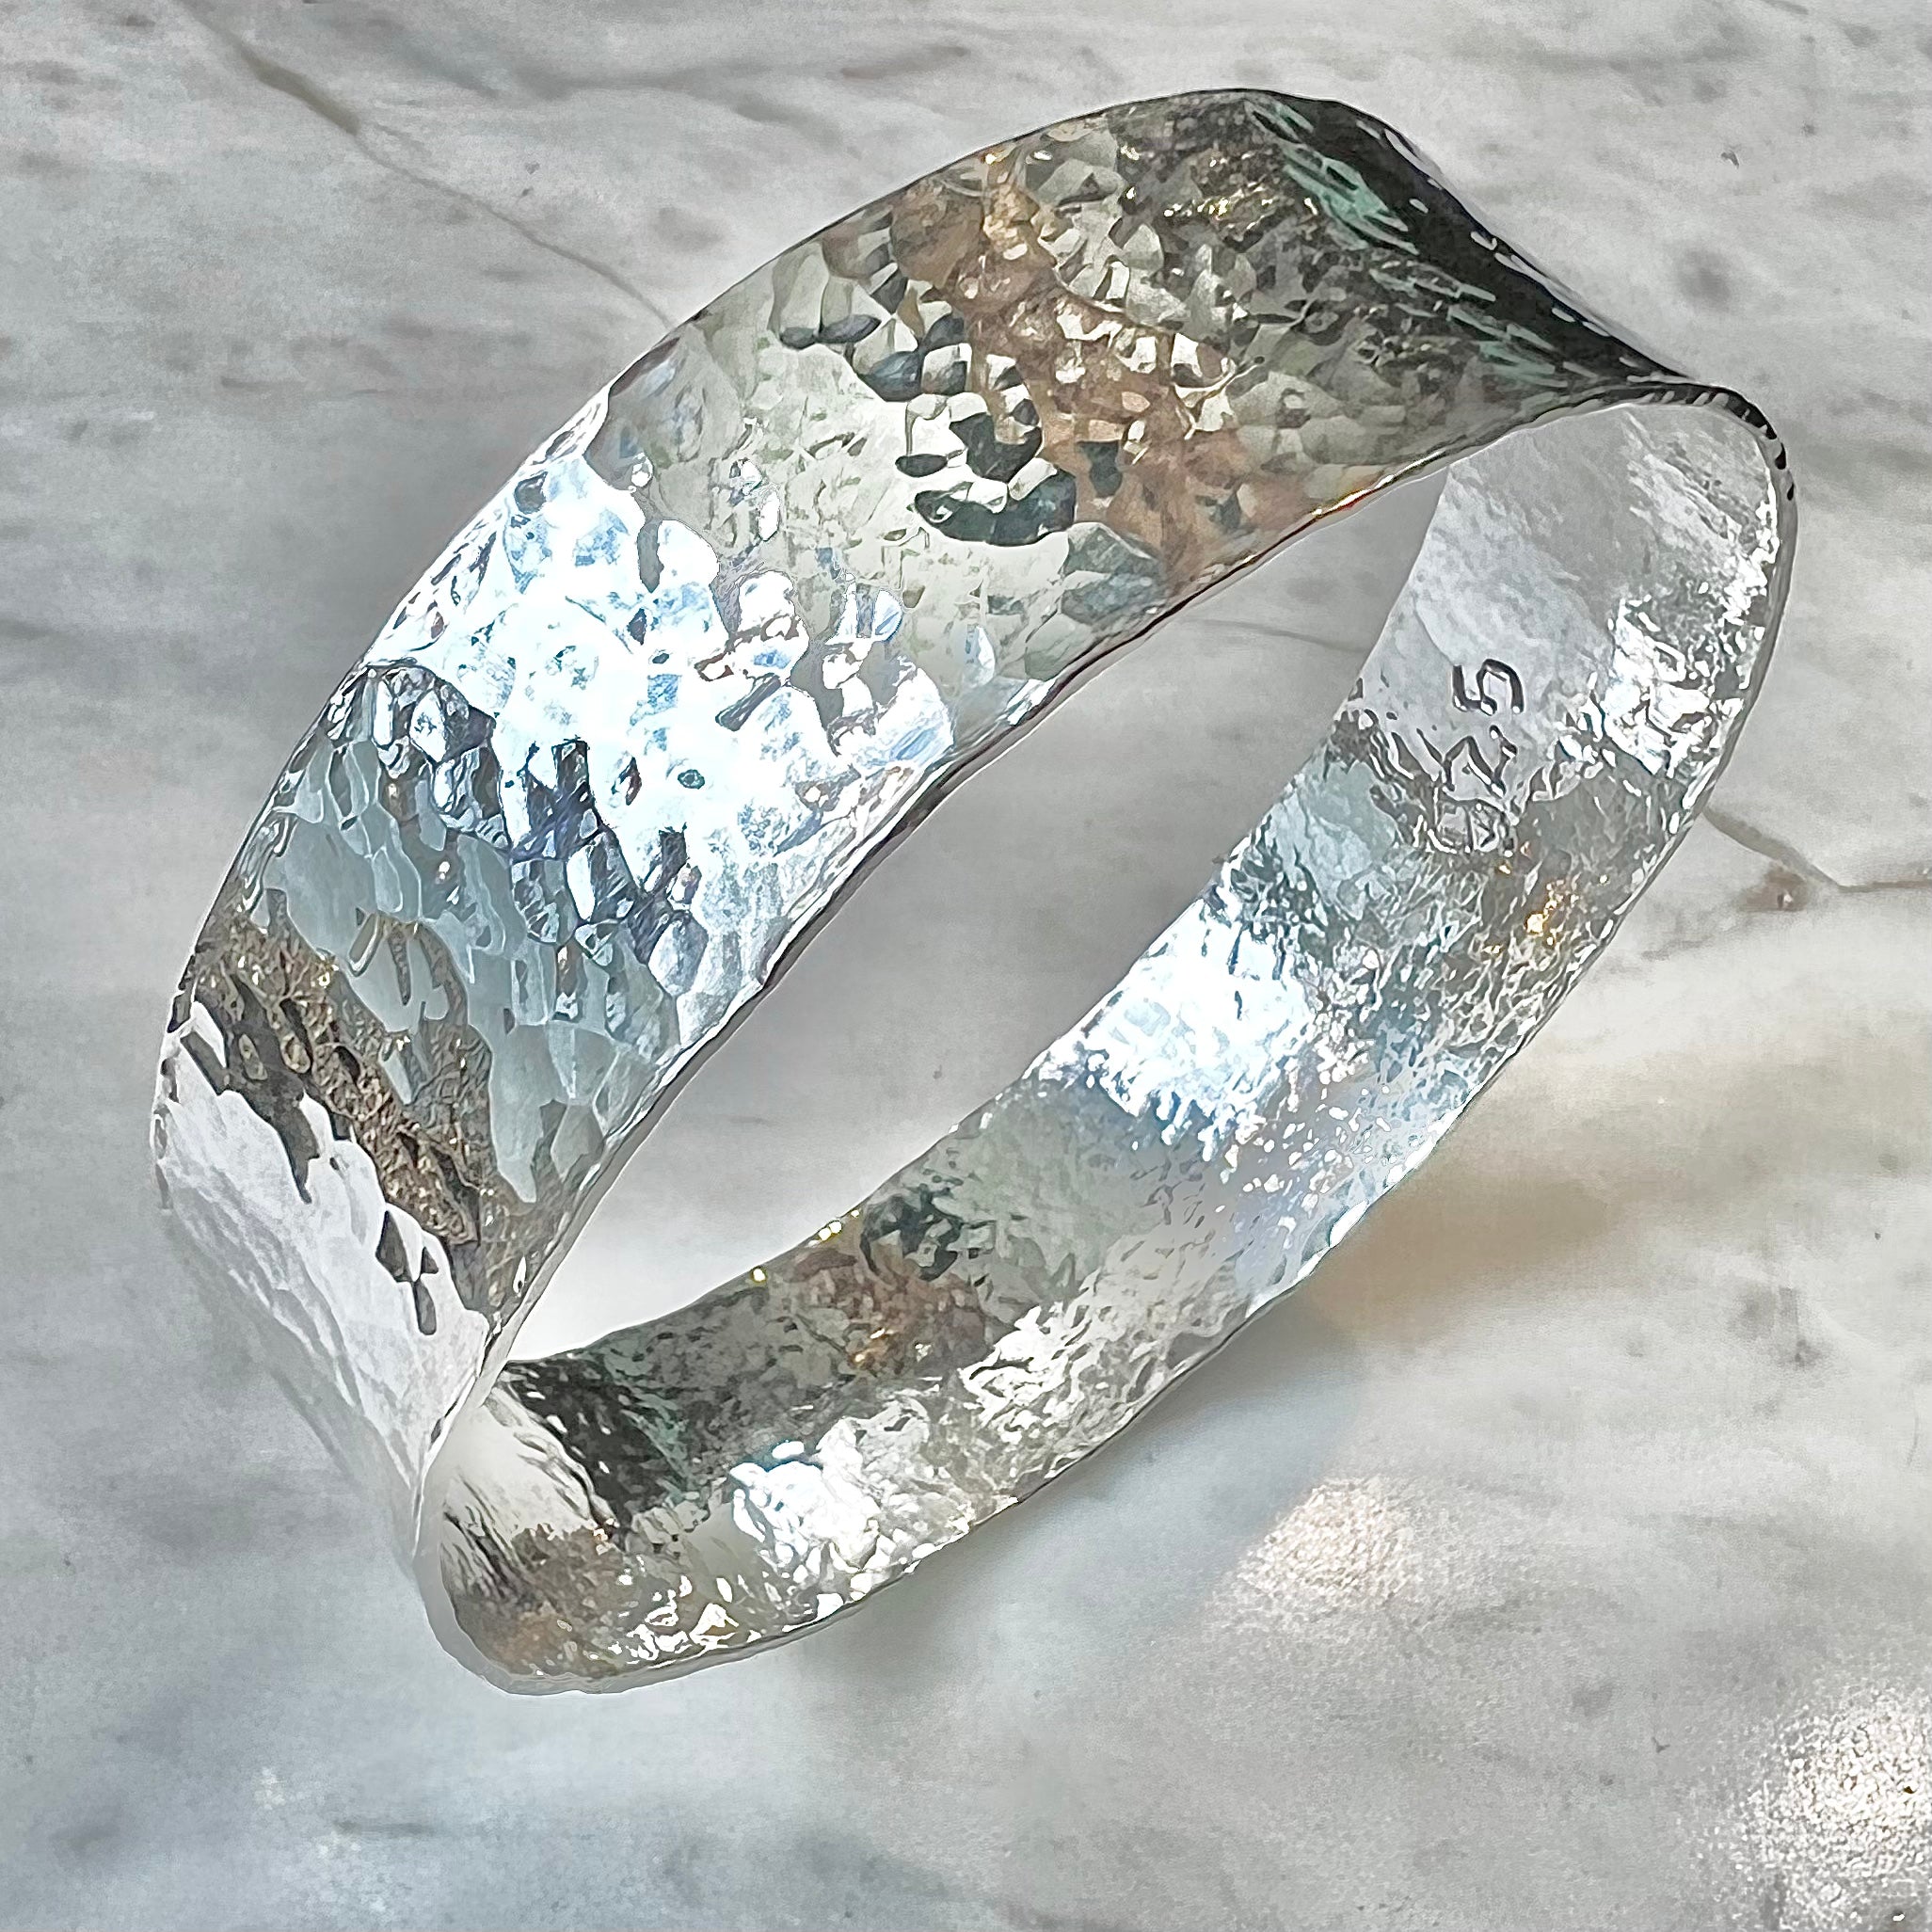 Women Oxidized SilverPlated Cuff Bracelet with floral pattern